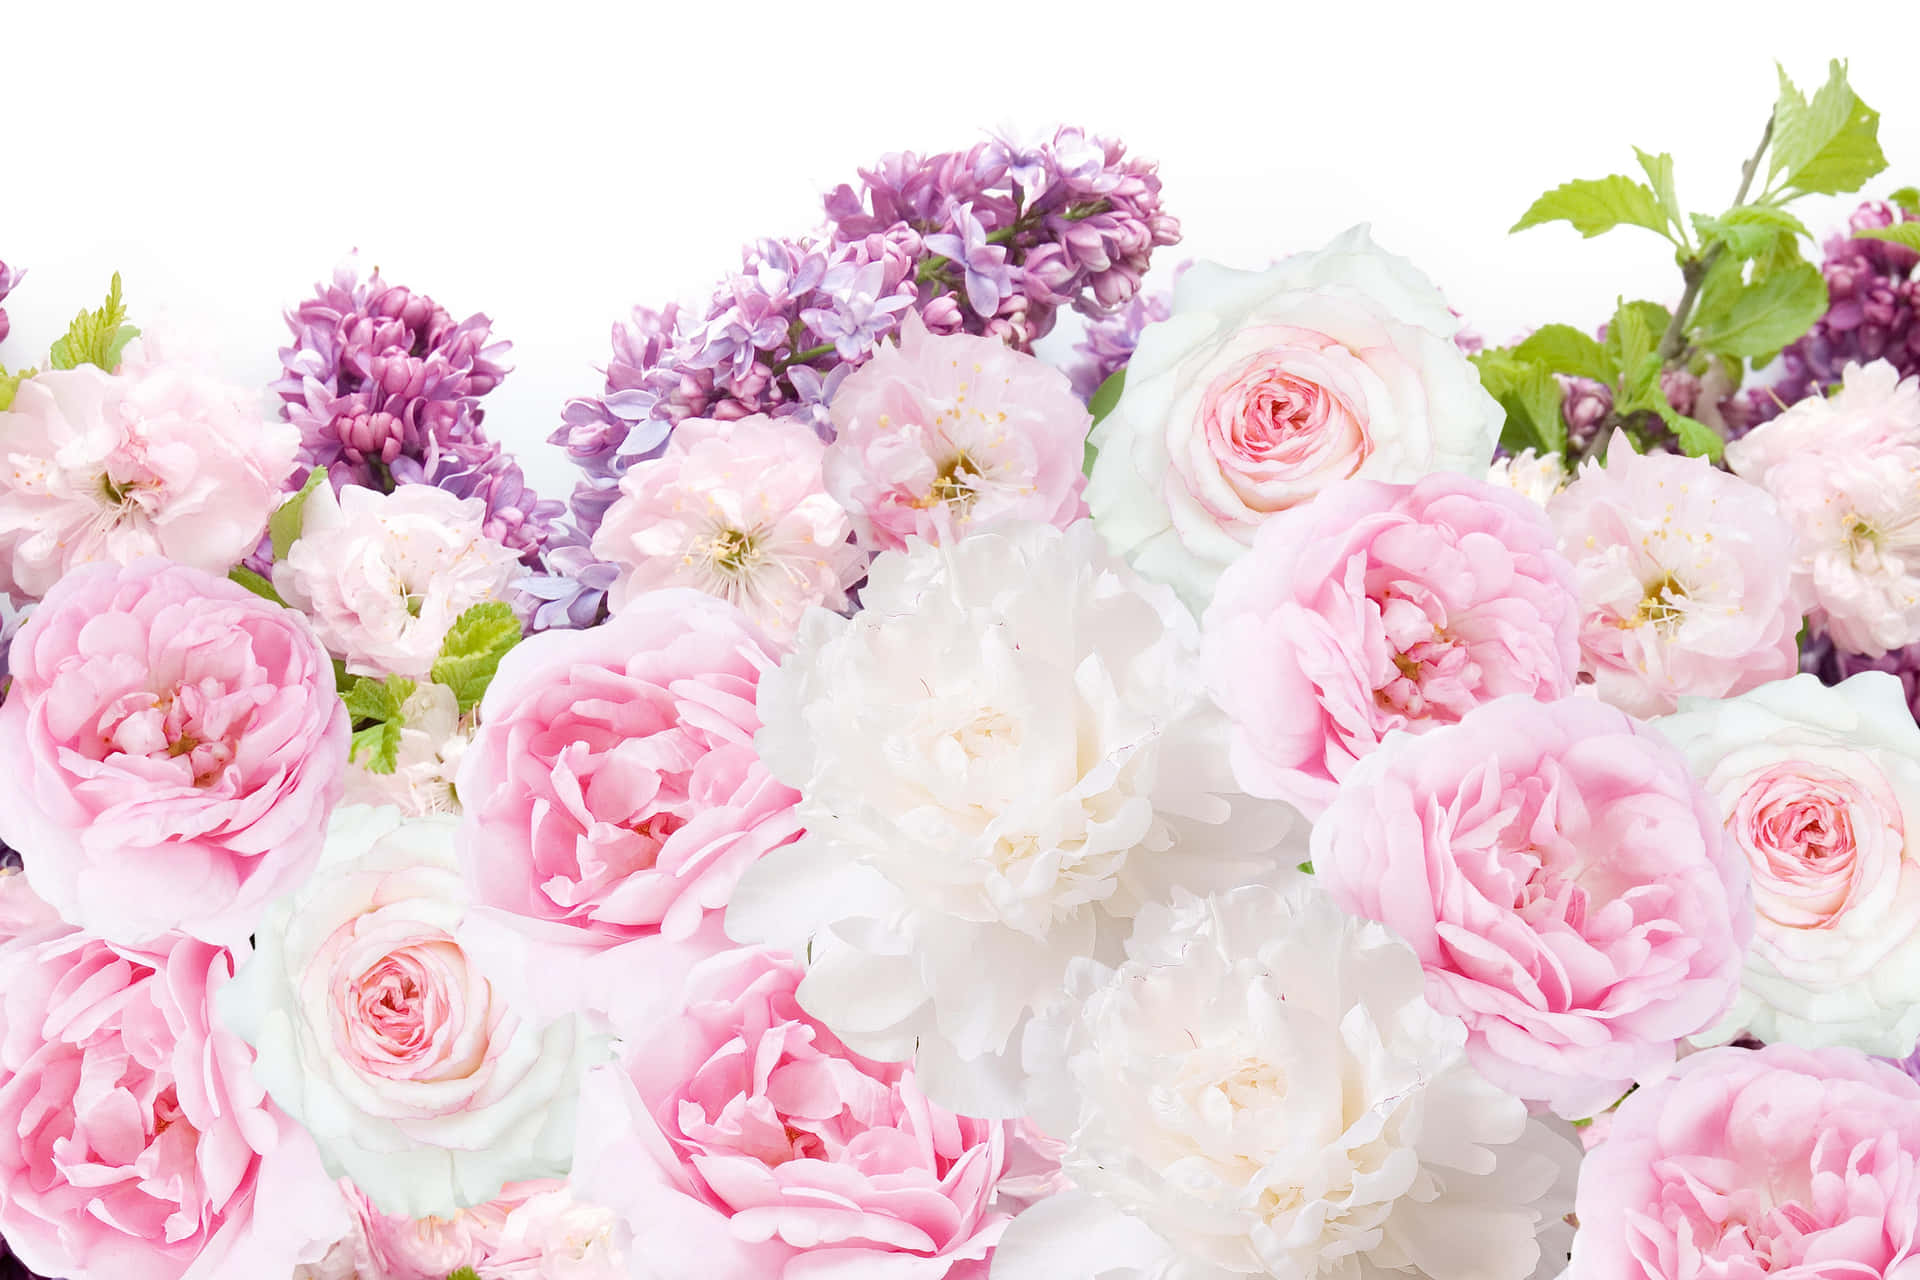 A Bouquet Of Pink And Purple Flowers